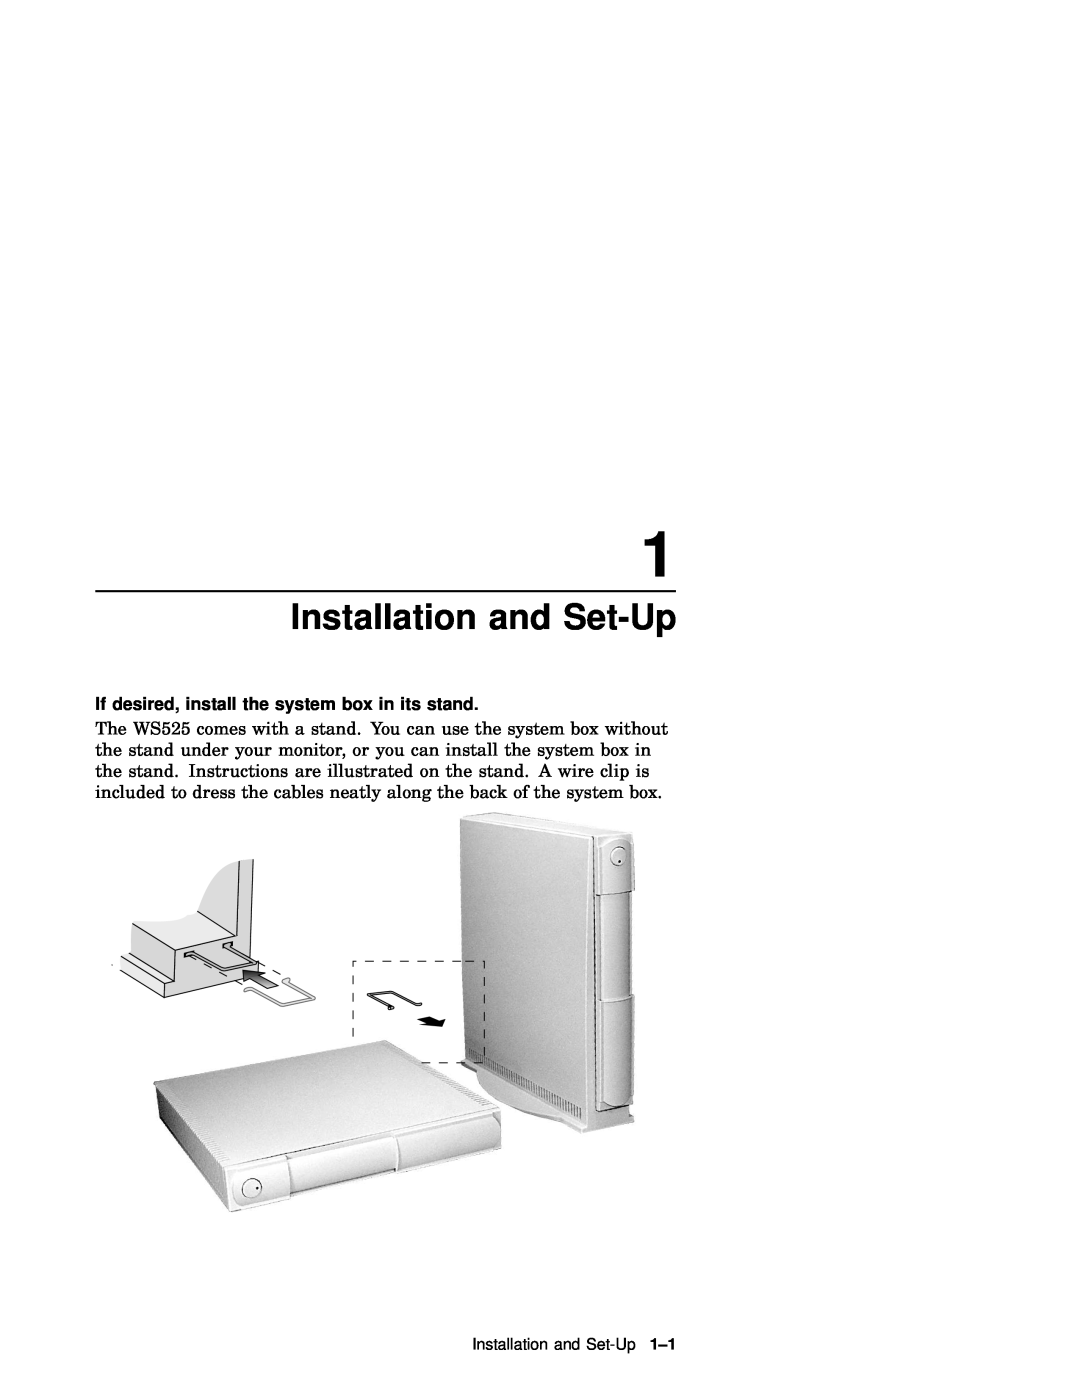 IBM WS525 manual Installation and Set-Up, If desired, install the system box in its stand 